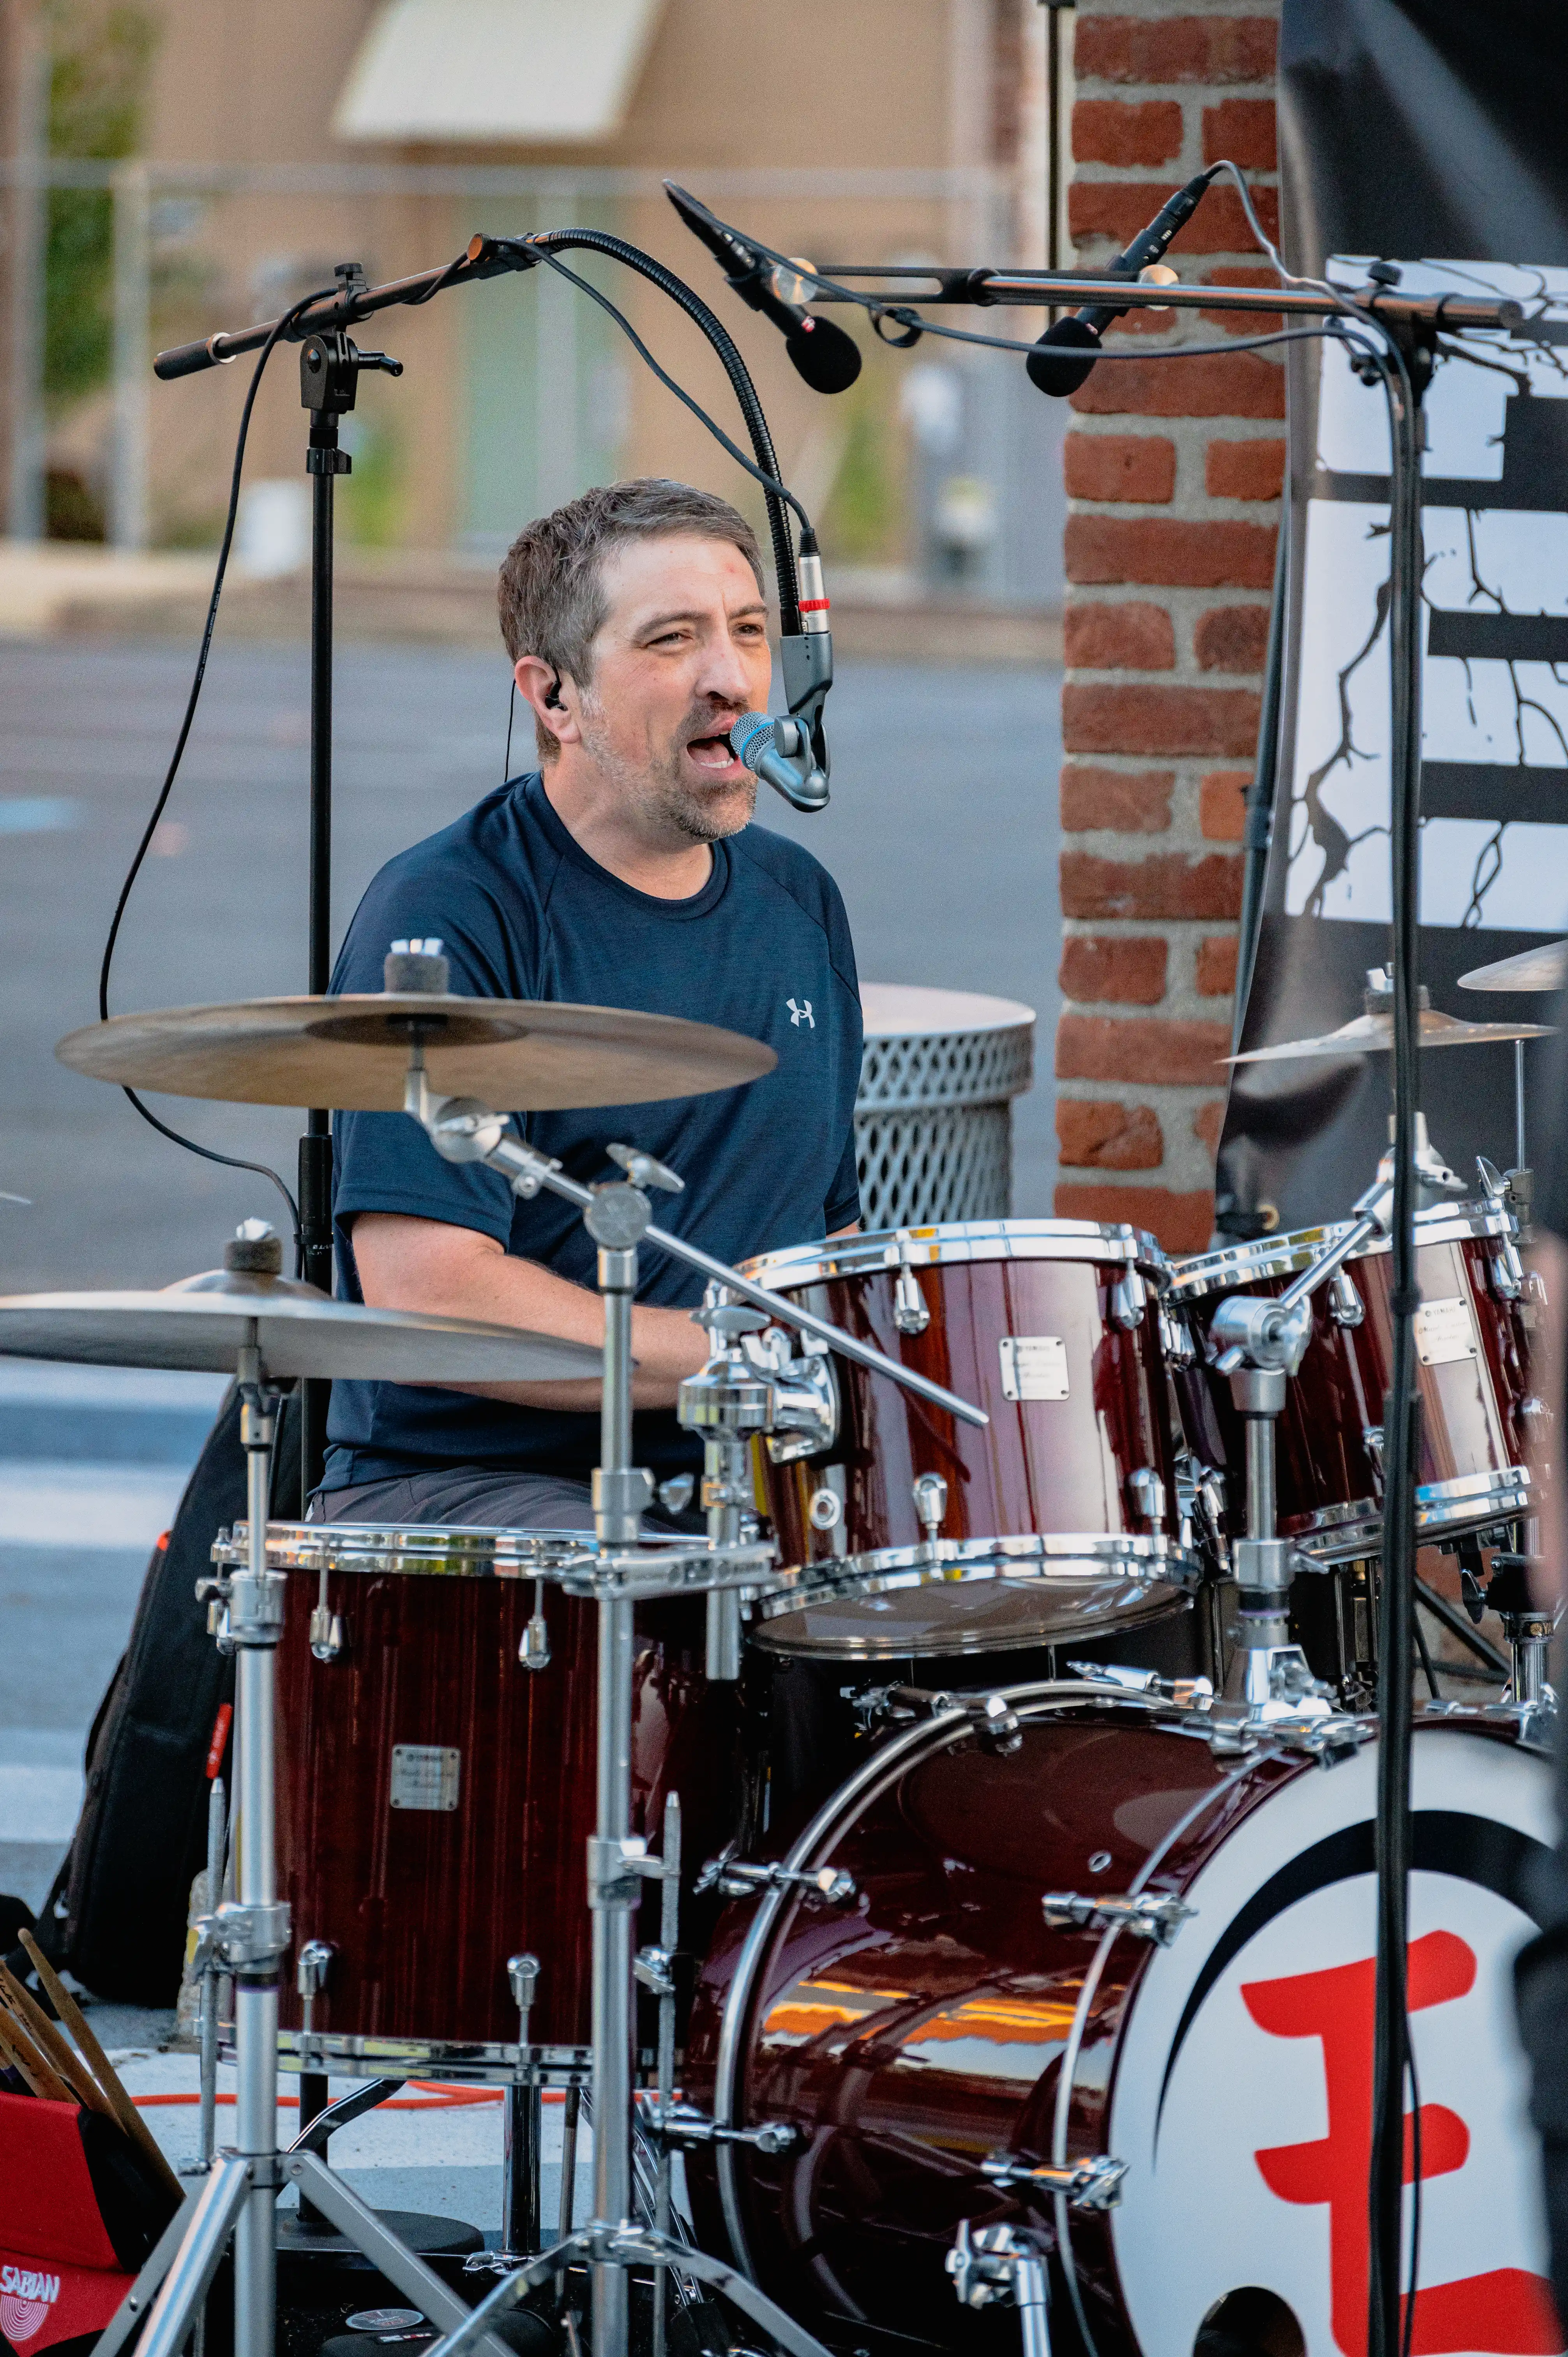 Drummer performing on stage with a red and white drum set.